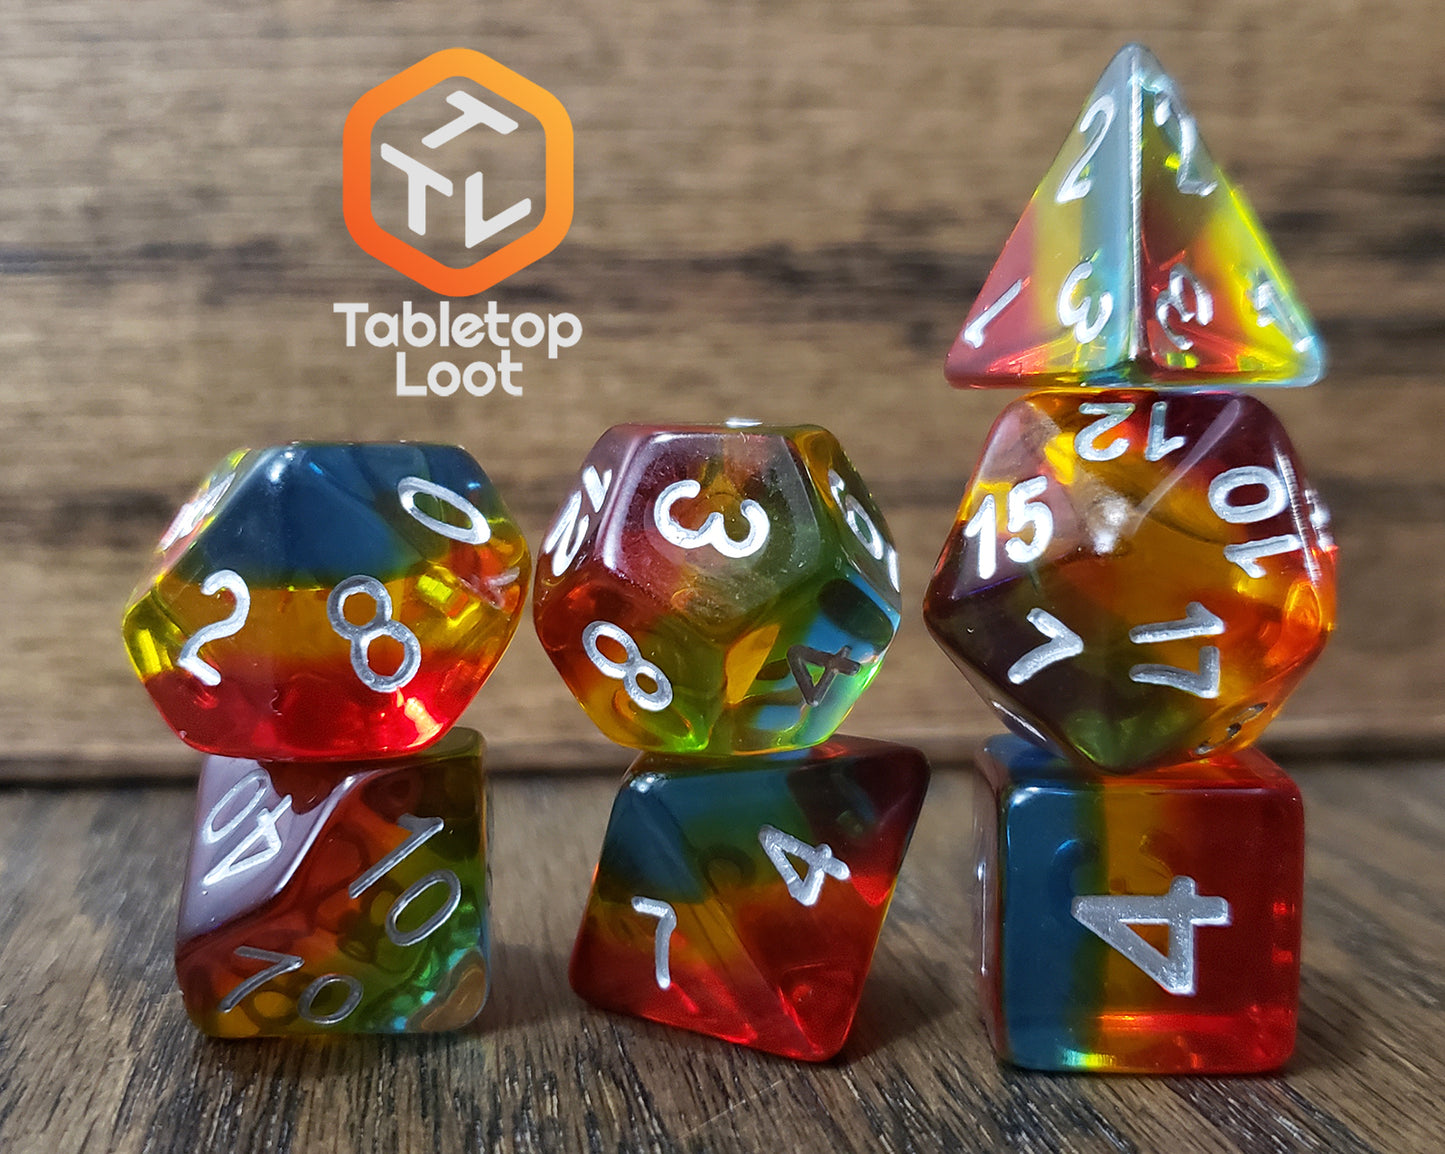 The Dusk 7 piece dice set from Tabletop Loot with blue, yellow, and red layers and white numbering.